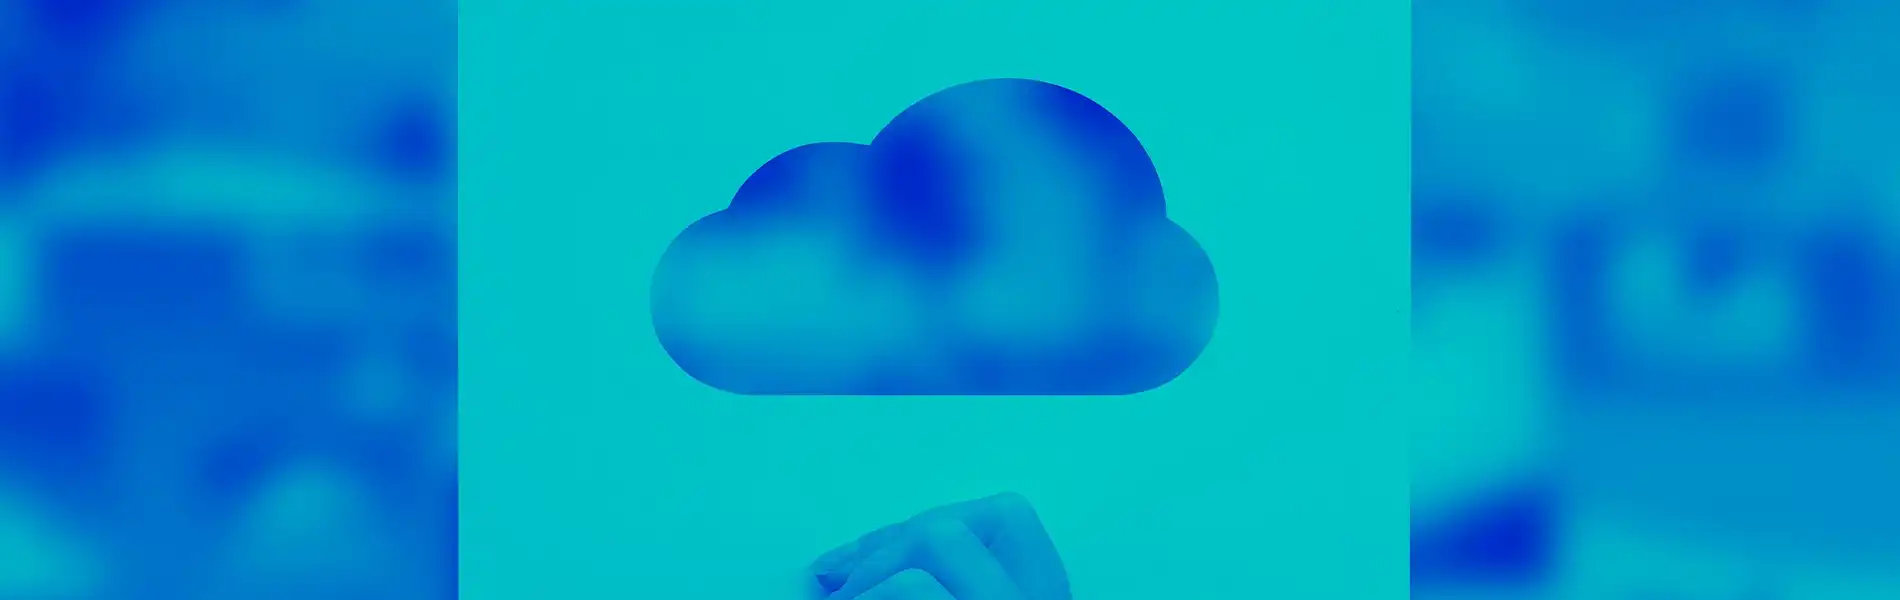 What is cloud computing and what are its uses